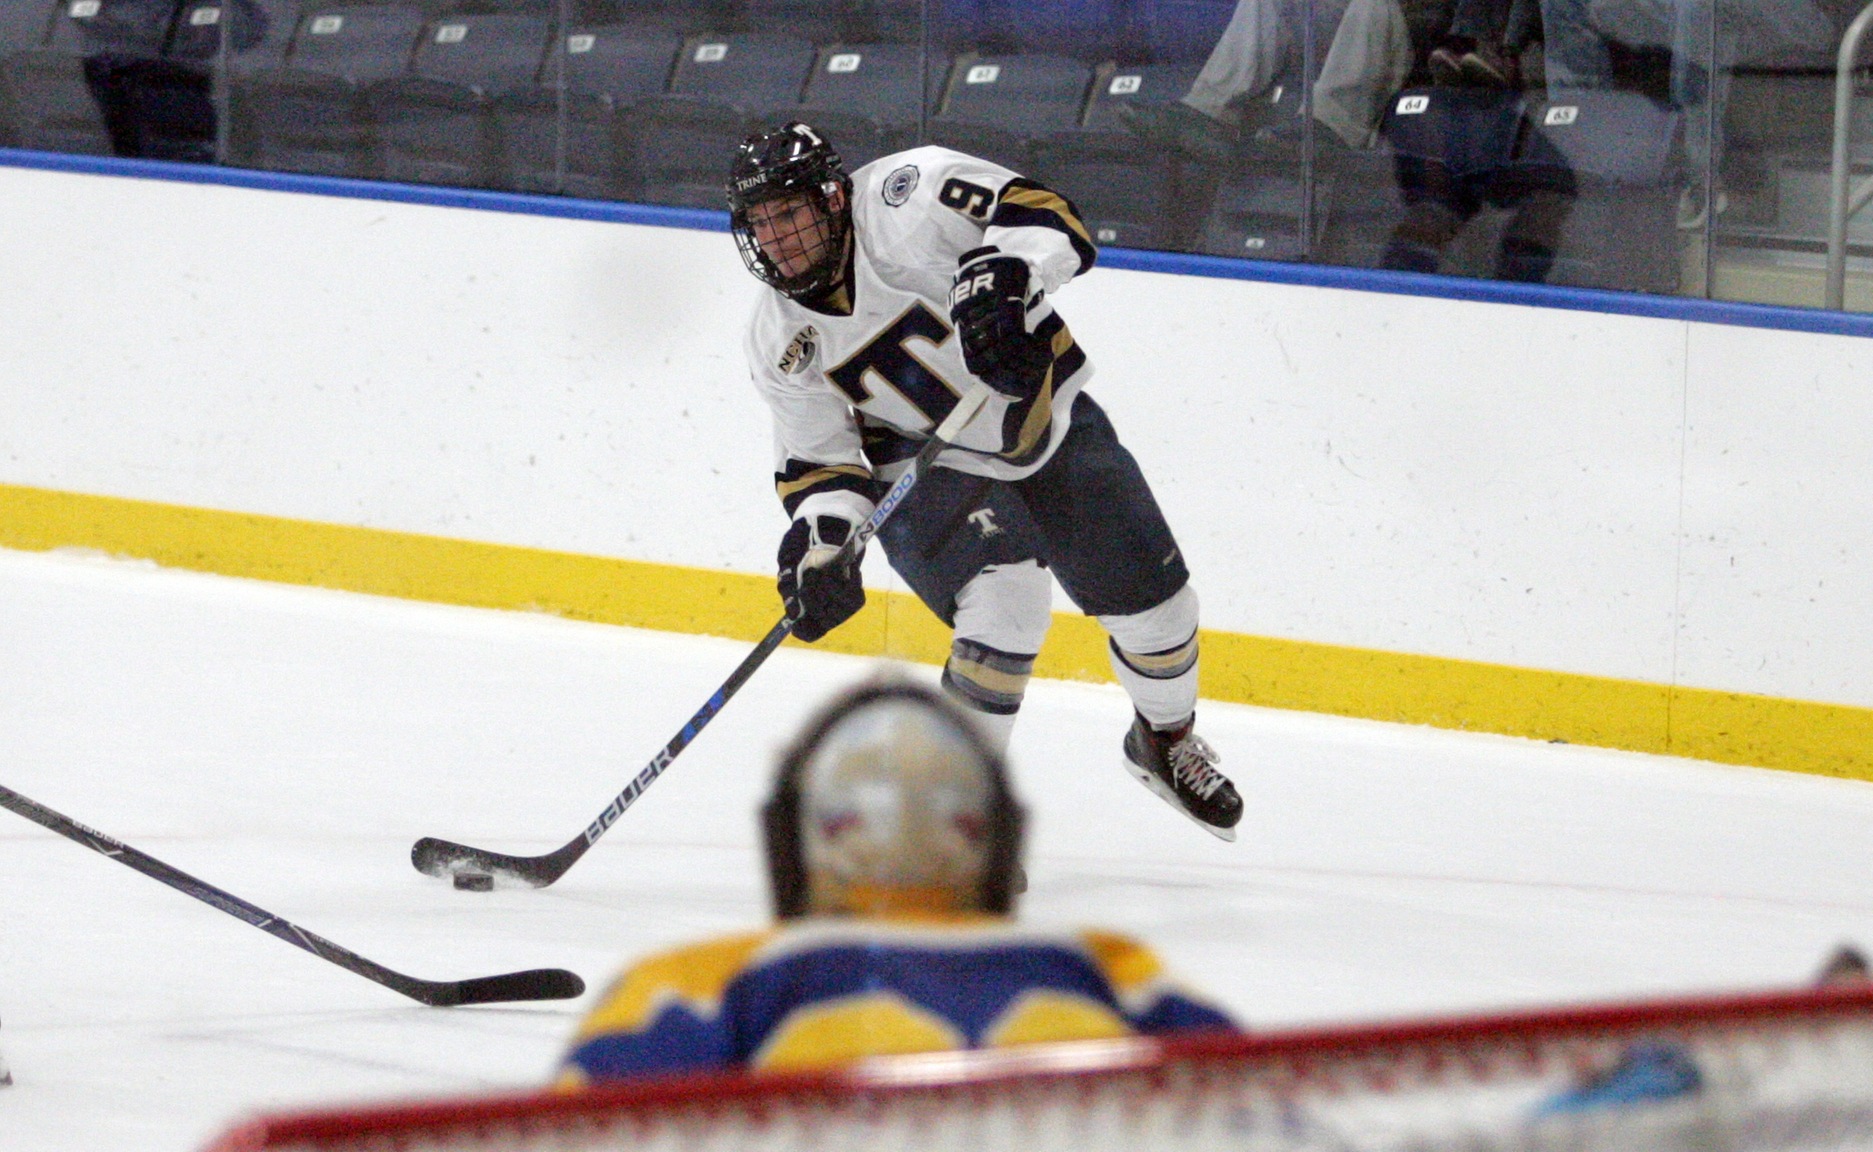 Trine Falls to Nationally-Ranked St. Norbert